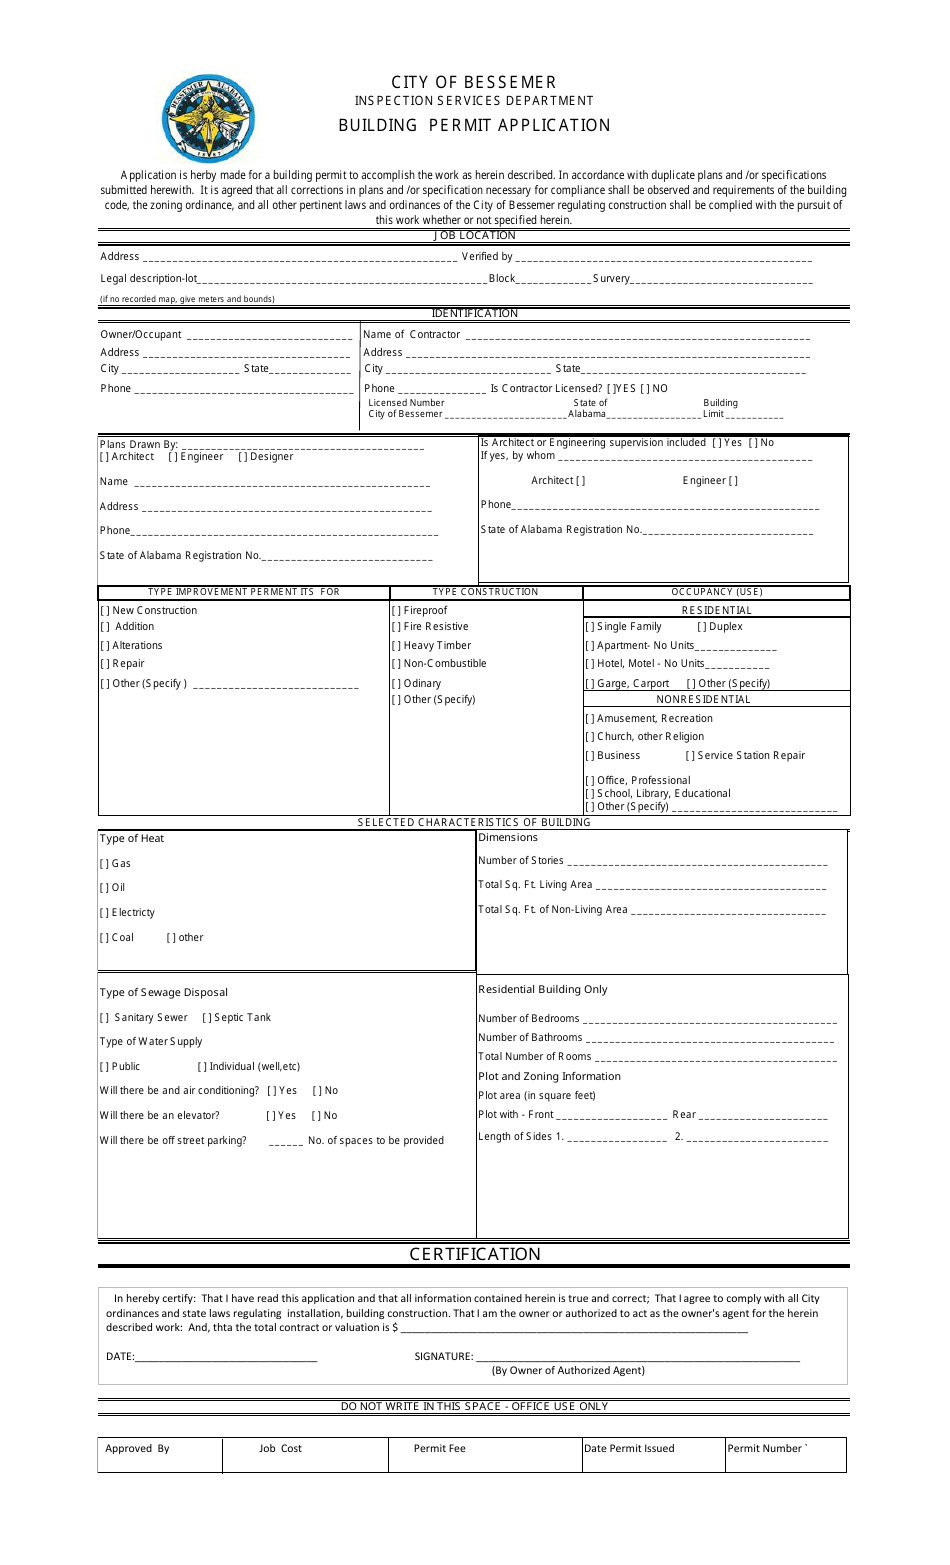 Building Permit Application Form - City of Bessemer, Alabama, Page 1